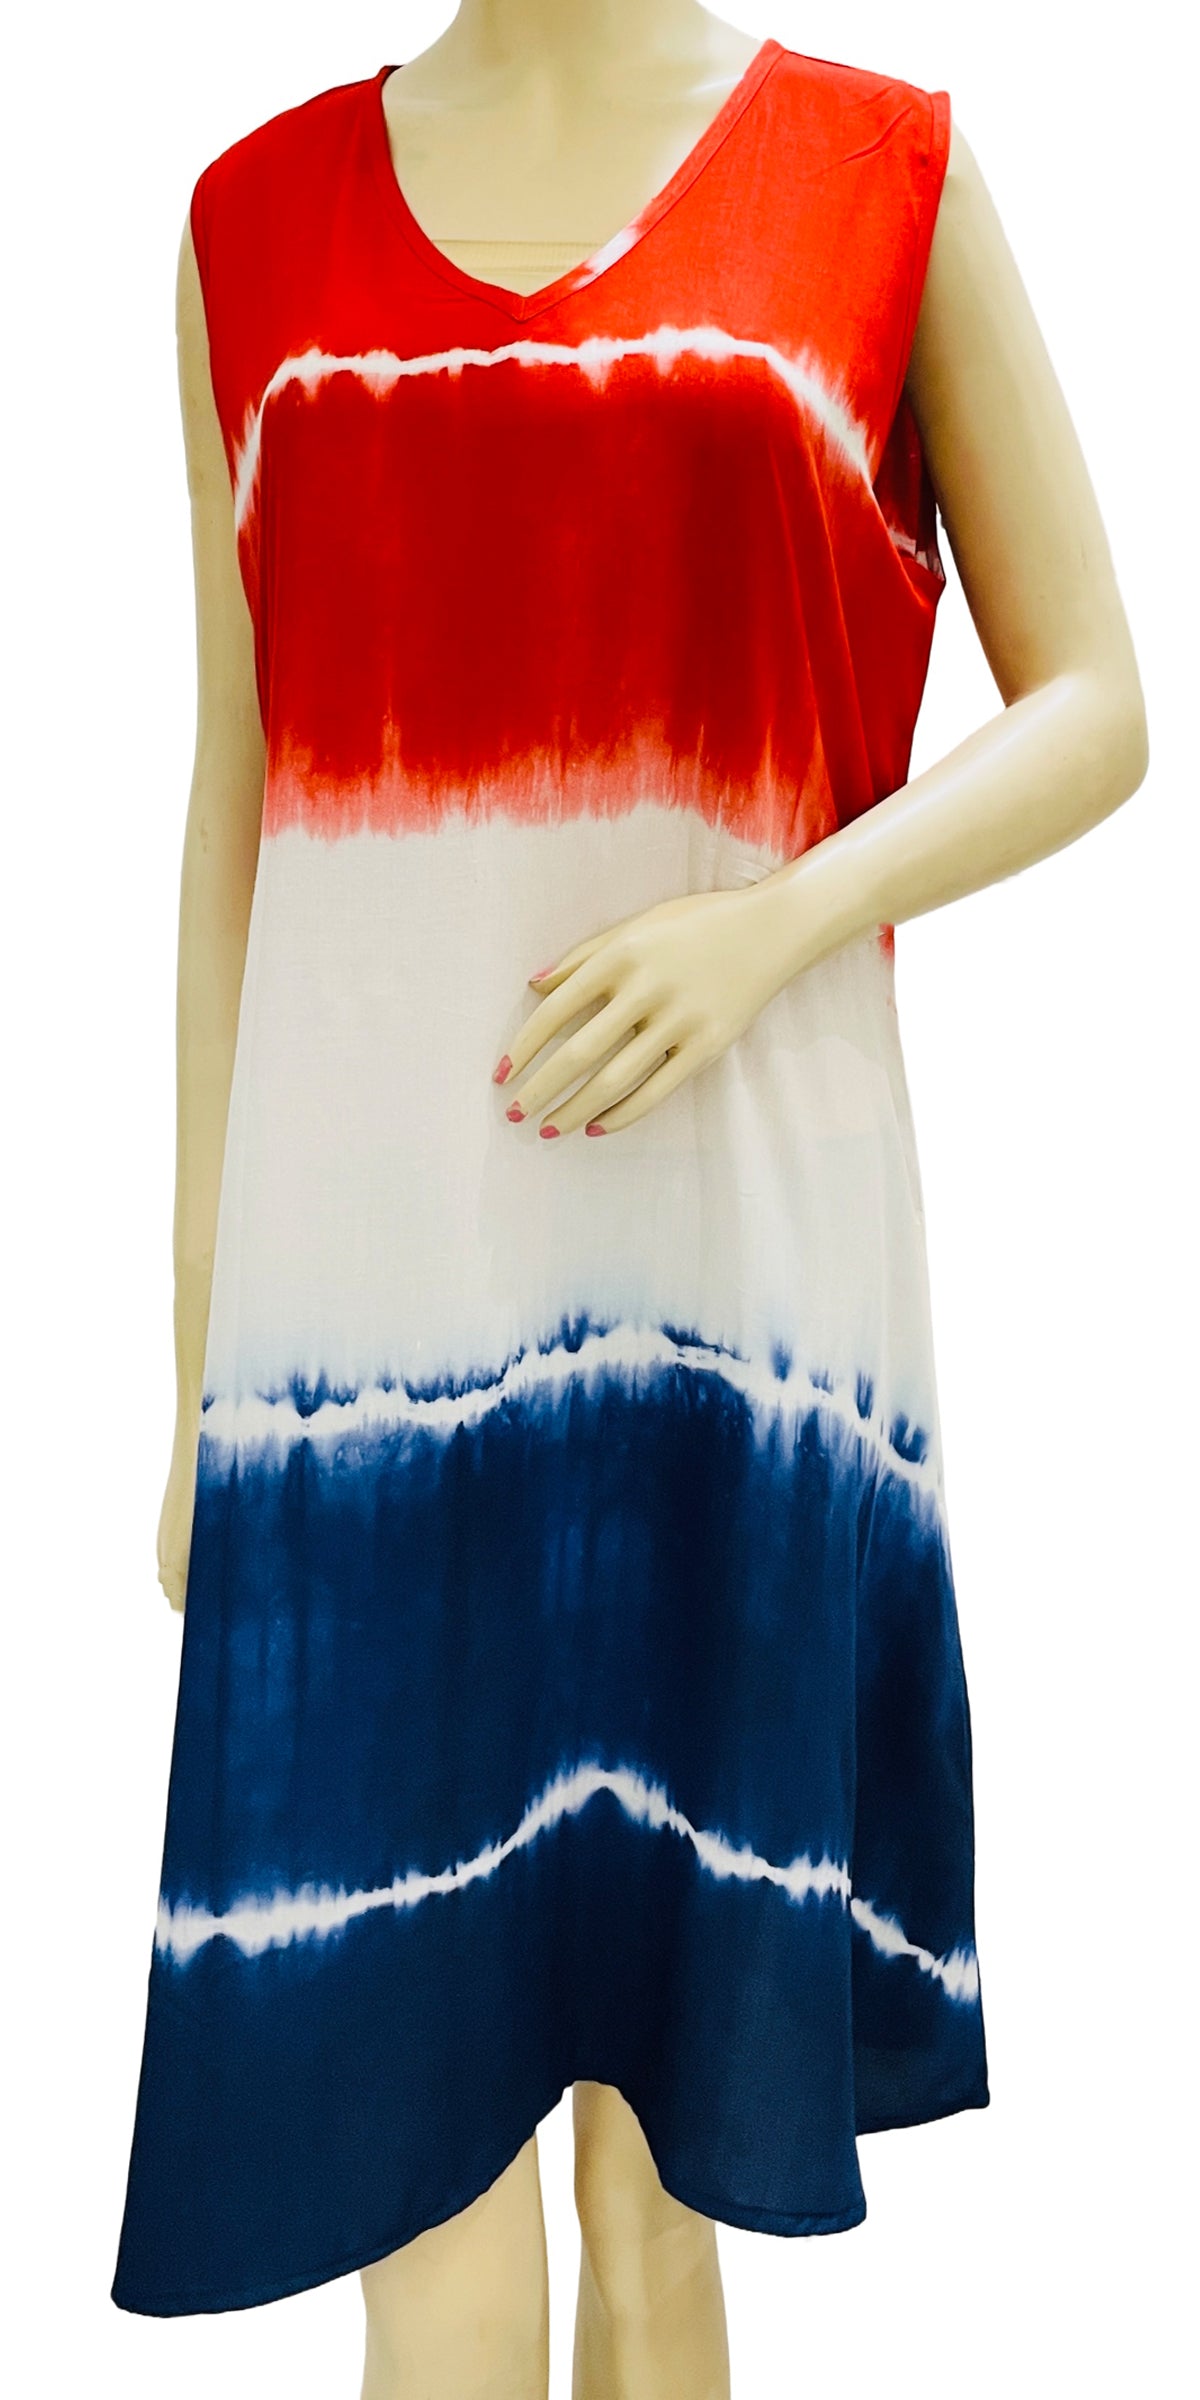 Red Blue White Short Dress Rayon Summer Hand Tie dye, American Flag Color Dress